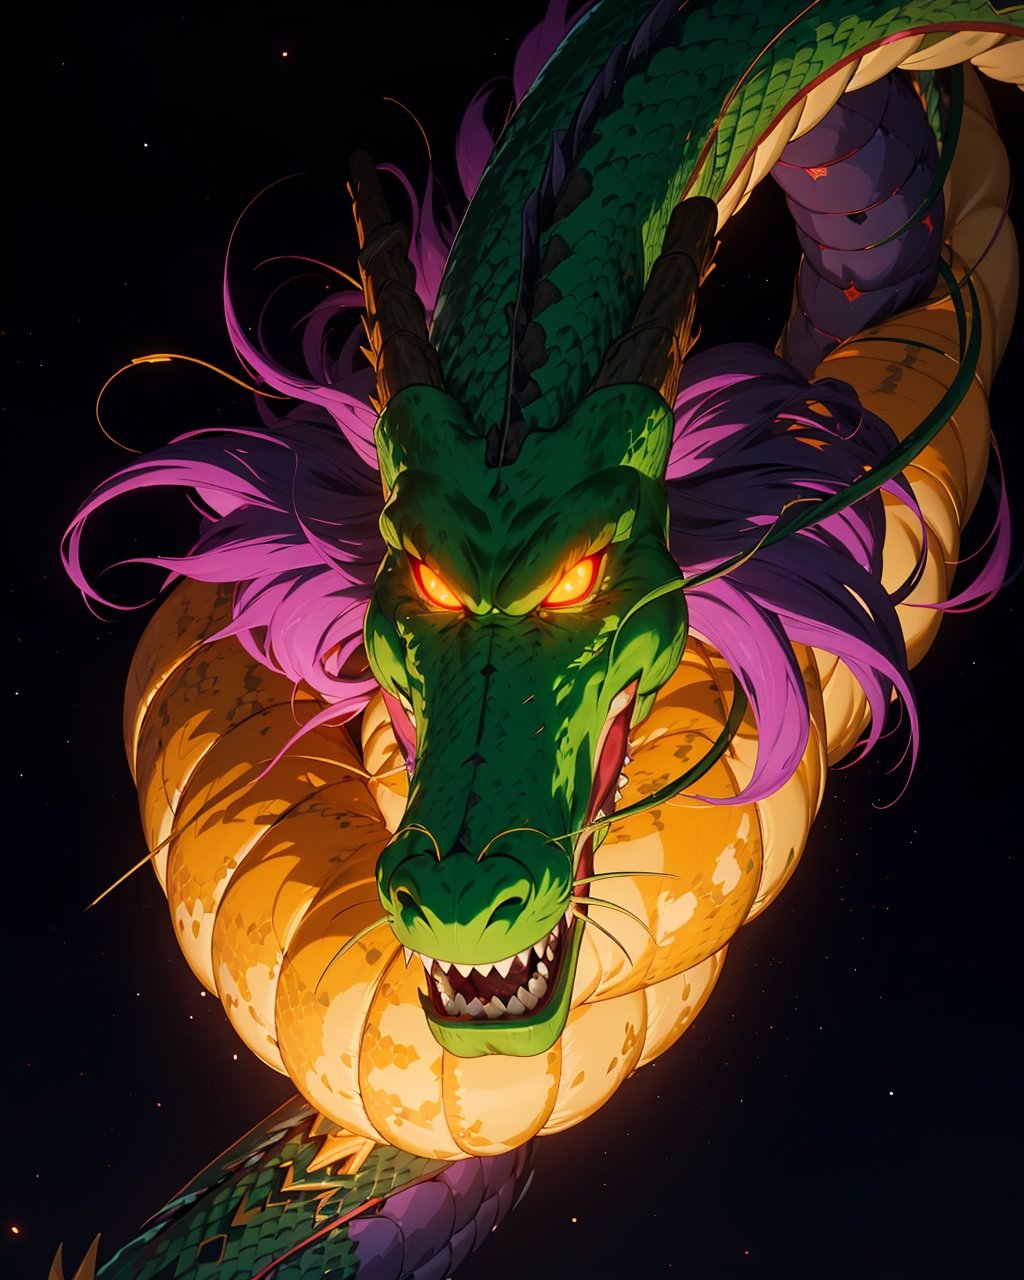 wyrm,shenlong, oriental dragon, night, glowing eyes, shiny, galaxy, stars, night sky, sharps theet, long whiskers, purple hair, floating debris, looking_at_viewer, asymetric, very long snake, intrincate details, realistic, ,r1ge, close up, 